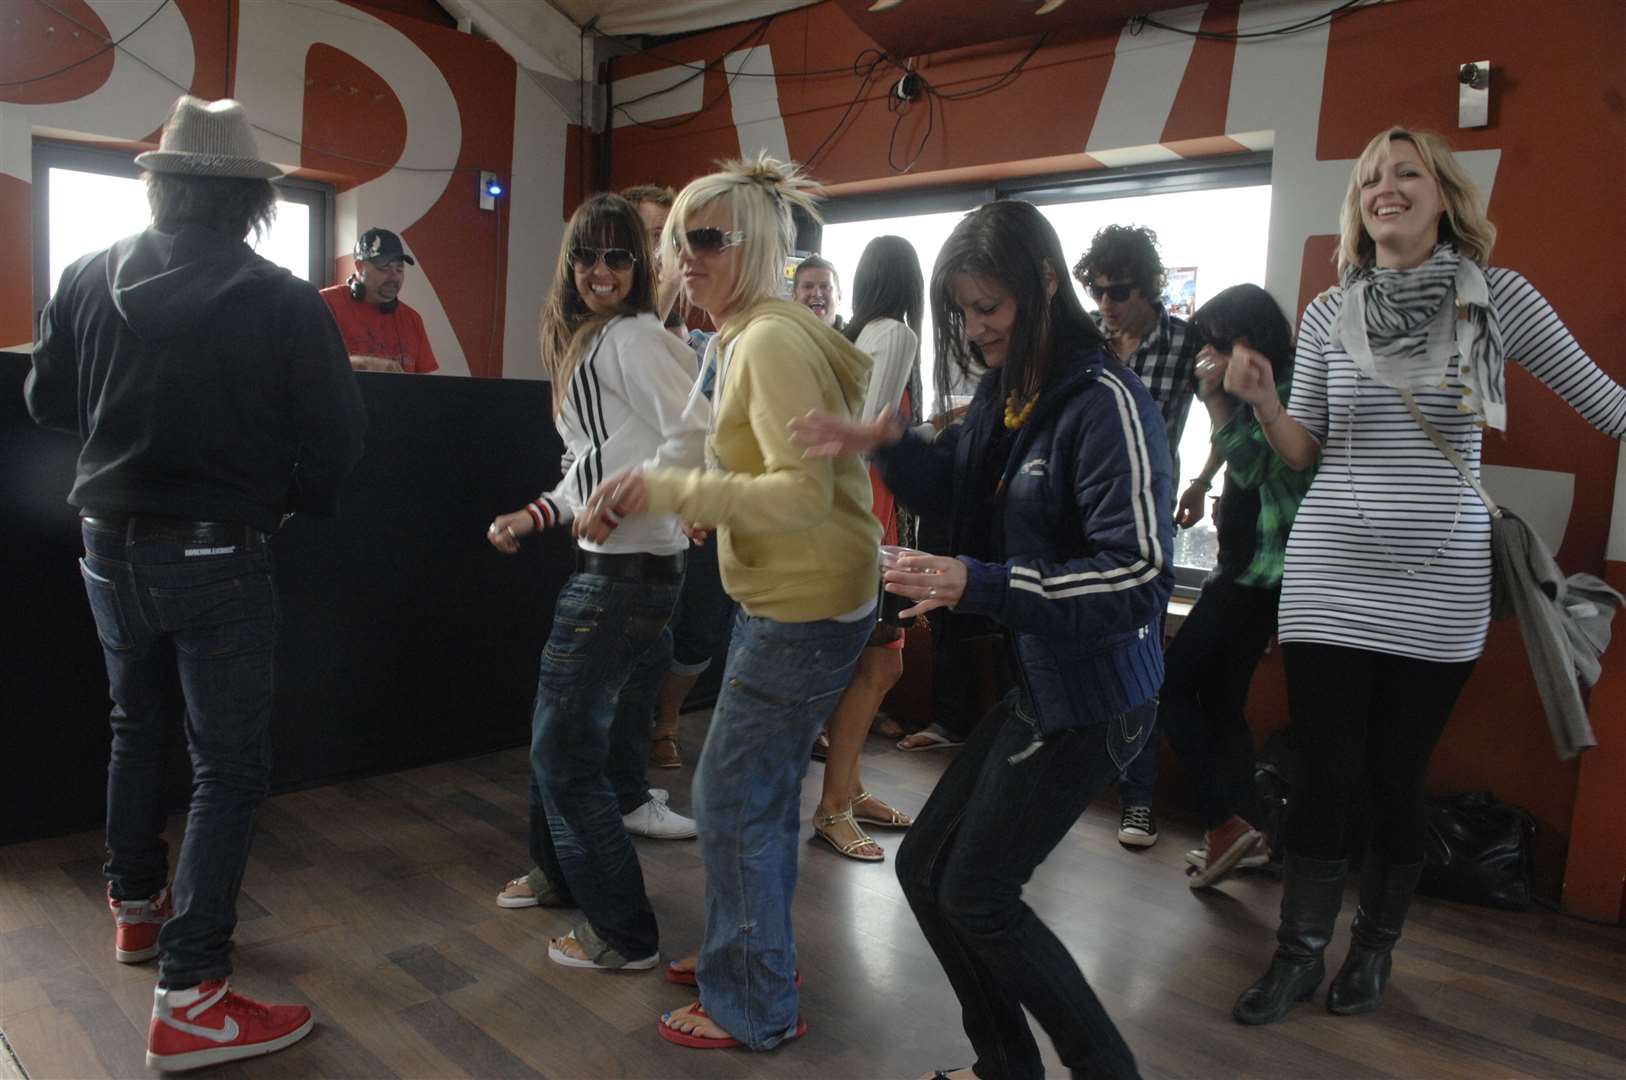 People dancing at Whitstable Brewery Bar in 2009